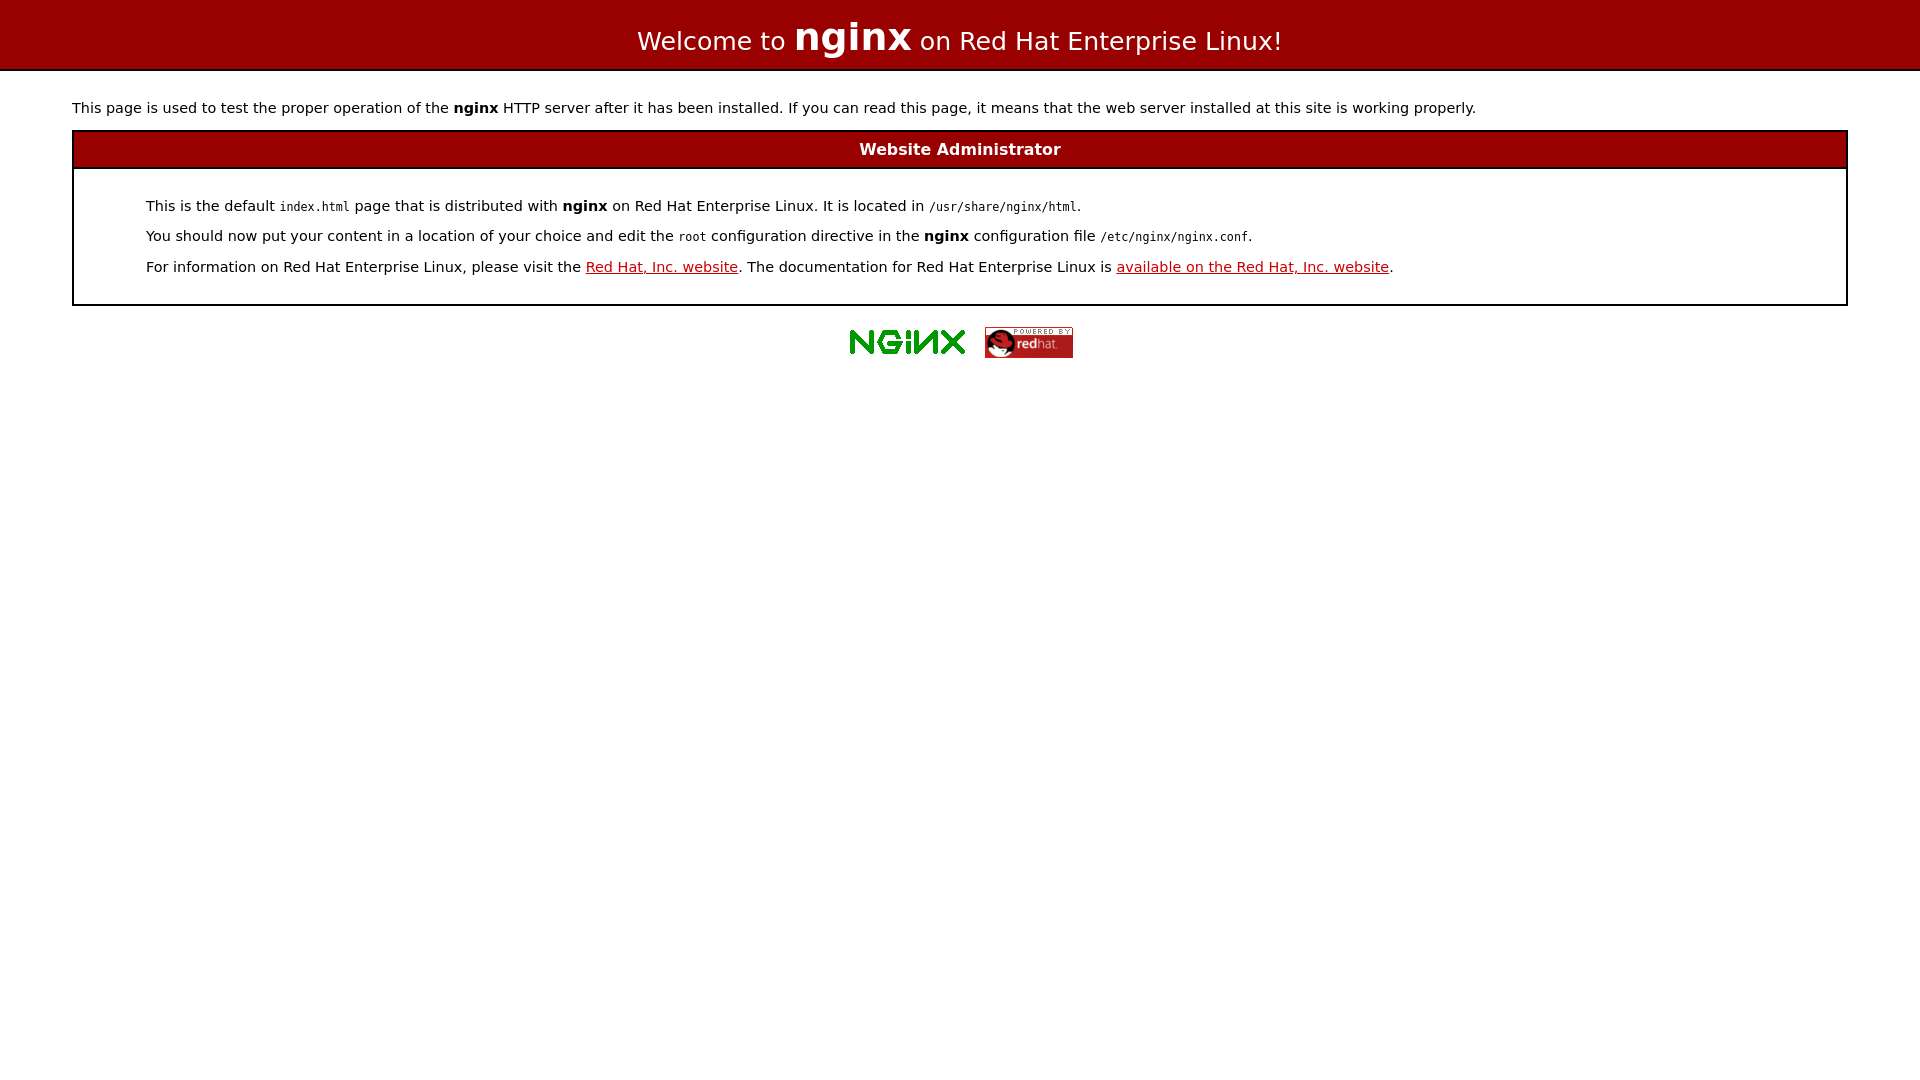 Test Page for the Nginx HTTP Server on Red Hat Enterprise Linux截图时间：2023-08-11